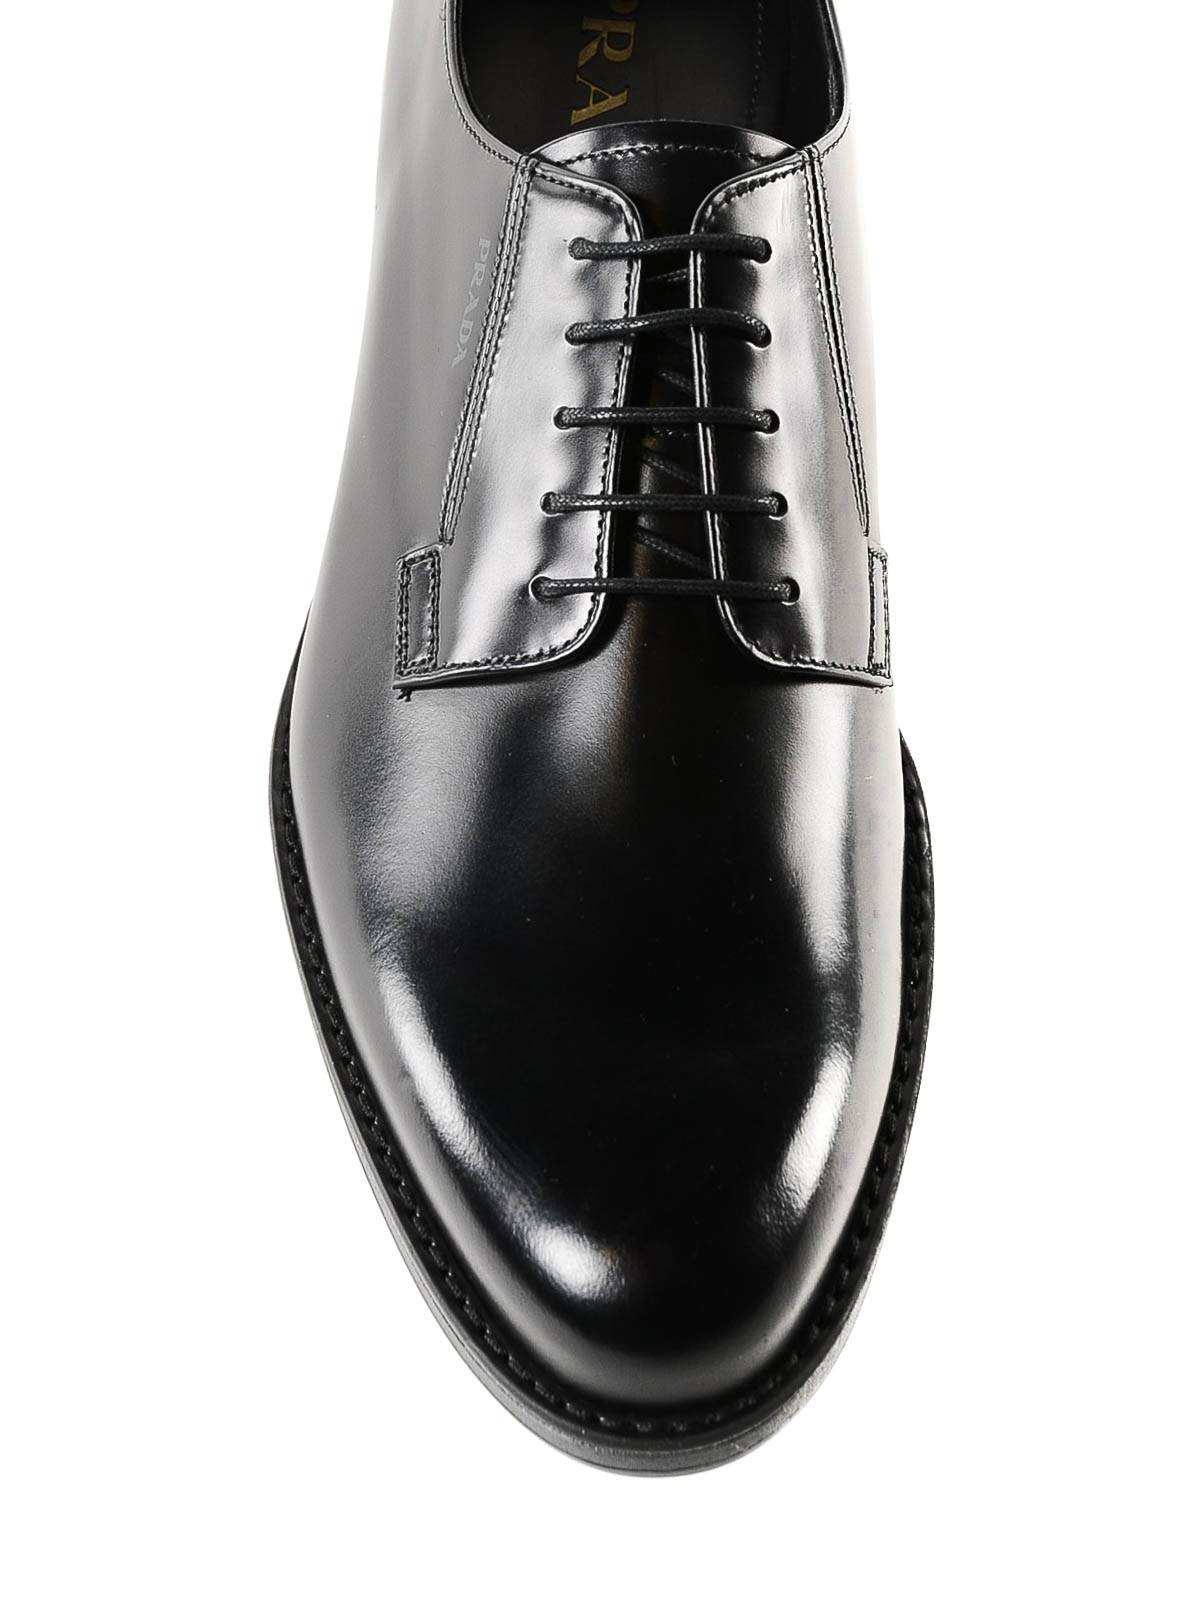 Lace-ups shoes Prada - Black smooth leather shoes - 2EE297B4L002